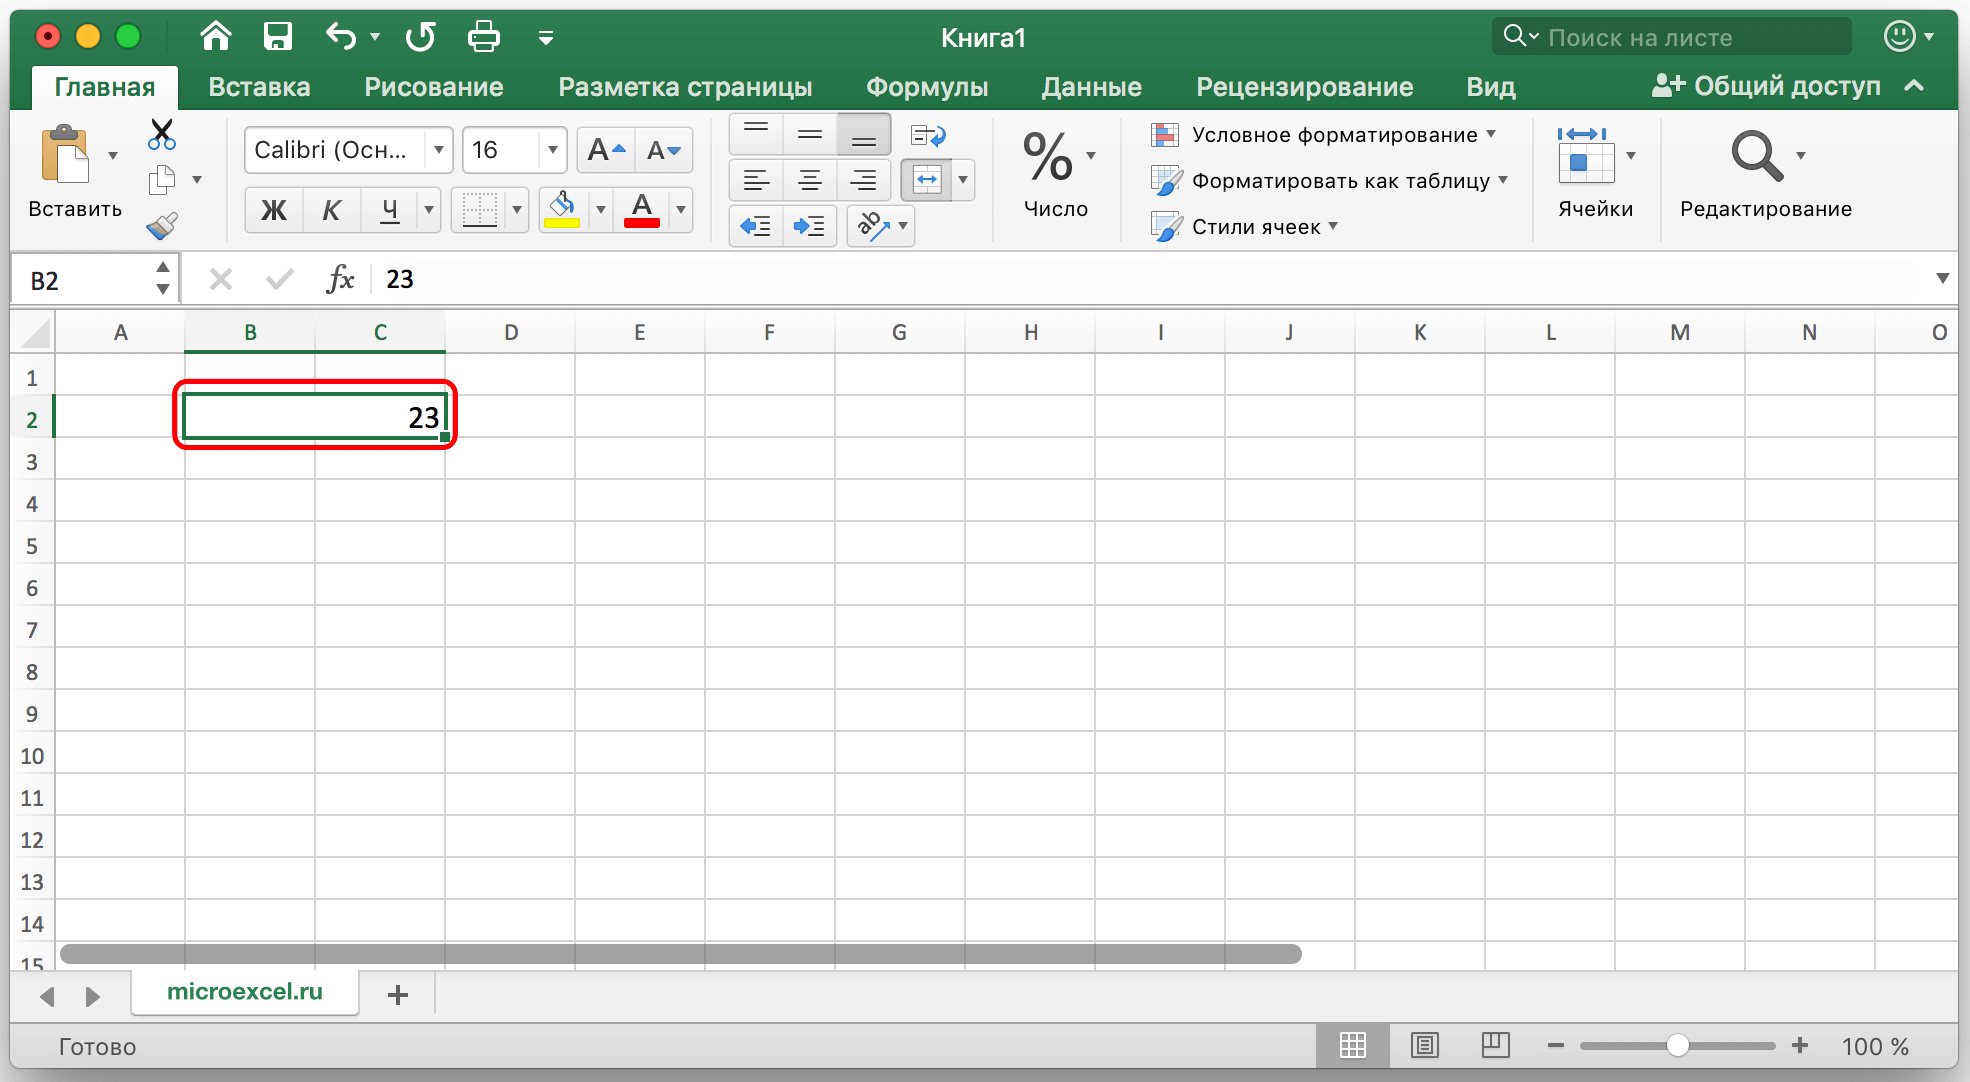 How to merge cells in an excel table